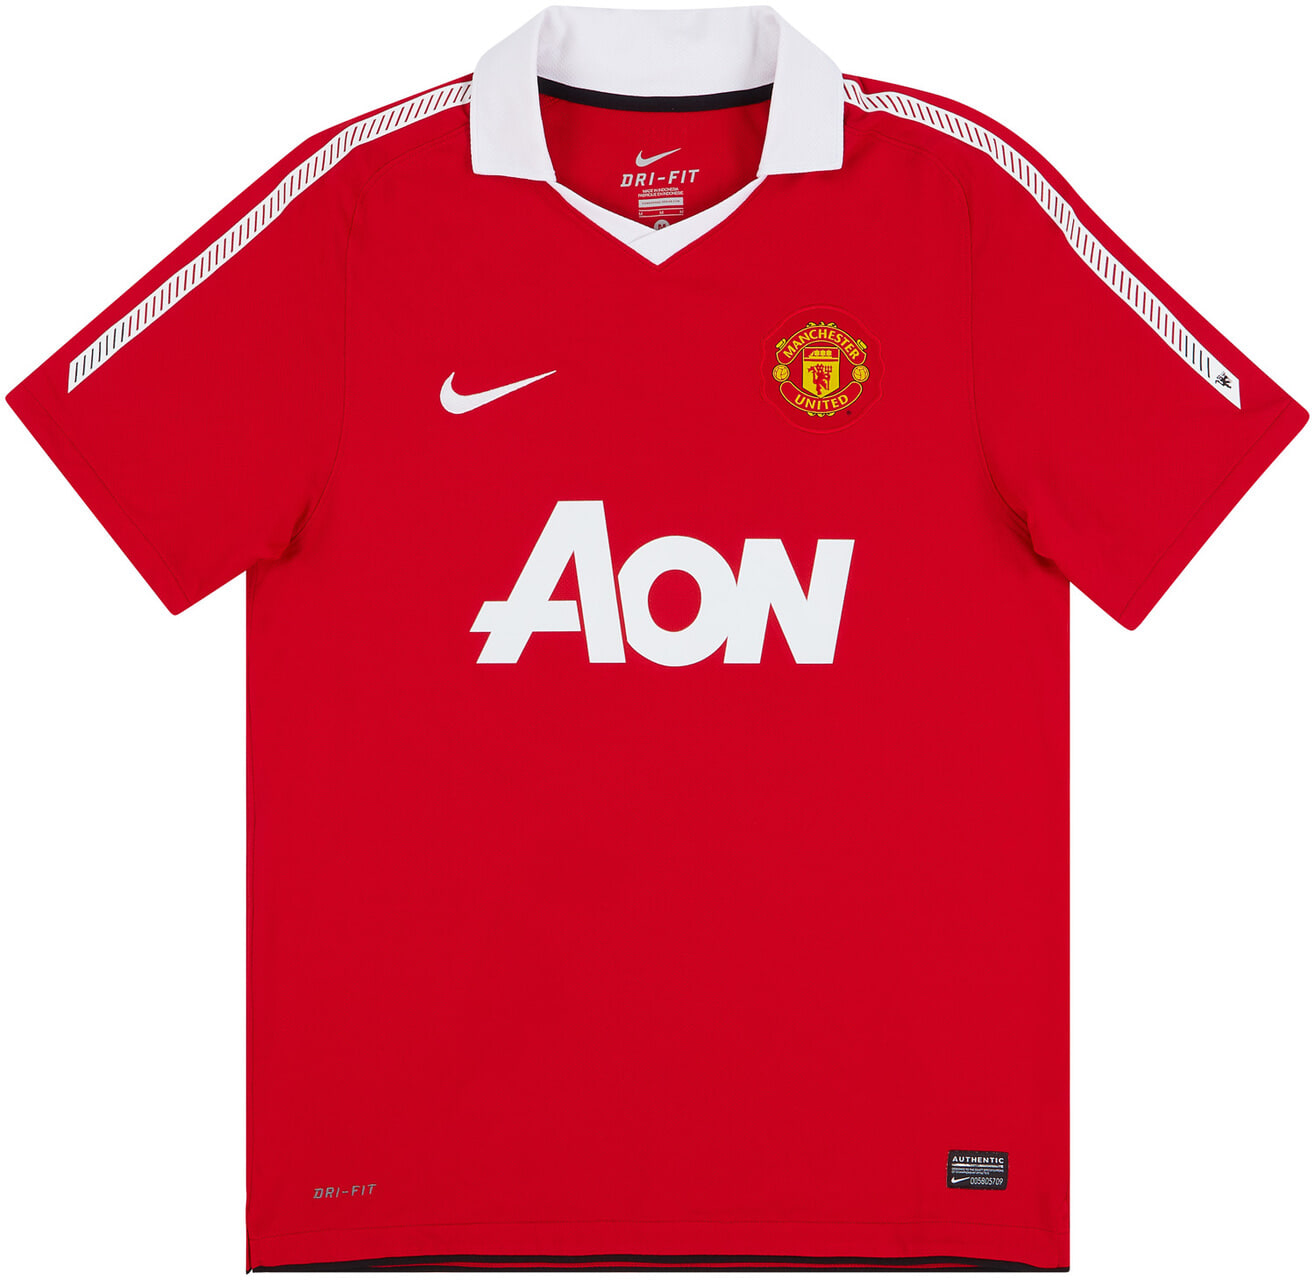 2010-11 Manchester United Home Shirt - 9/10 -